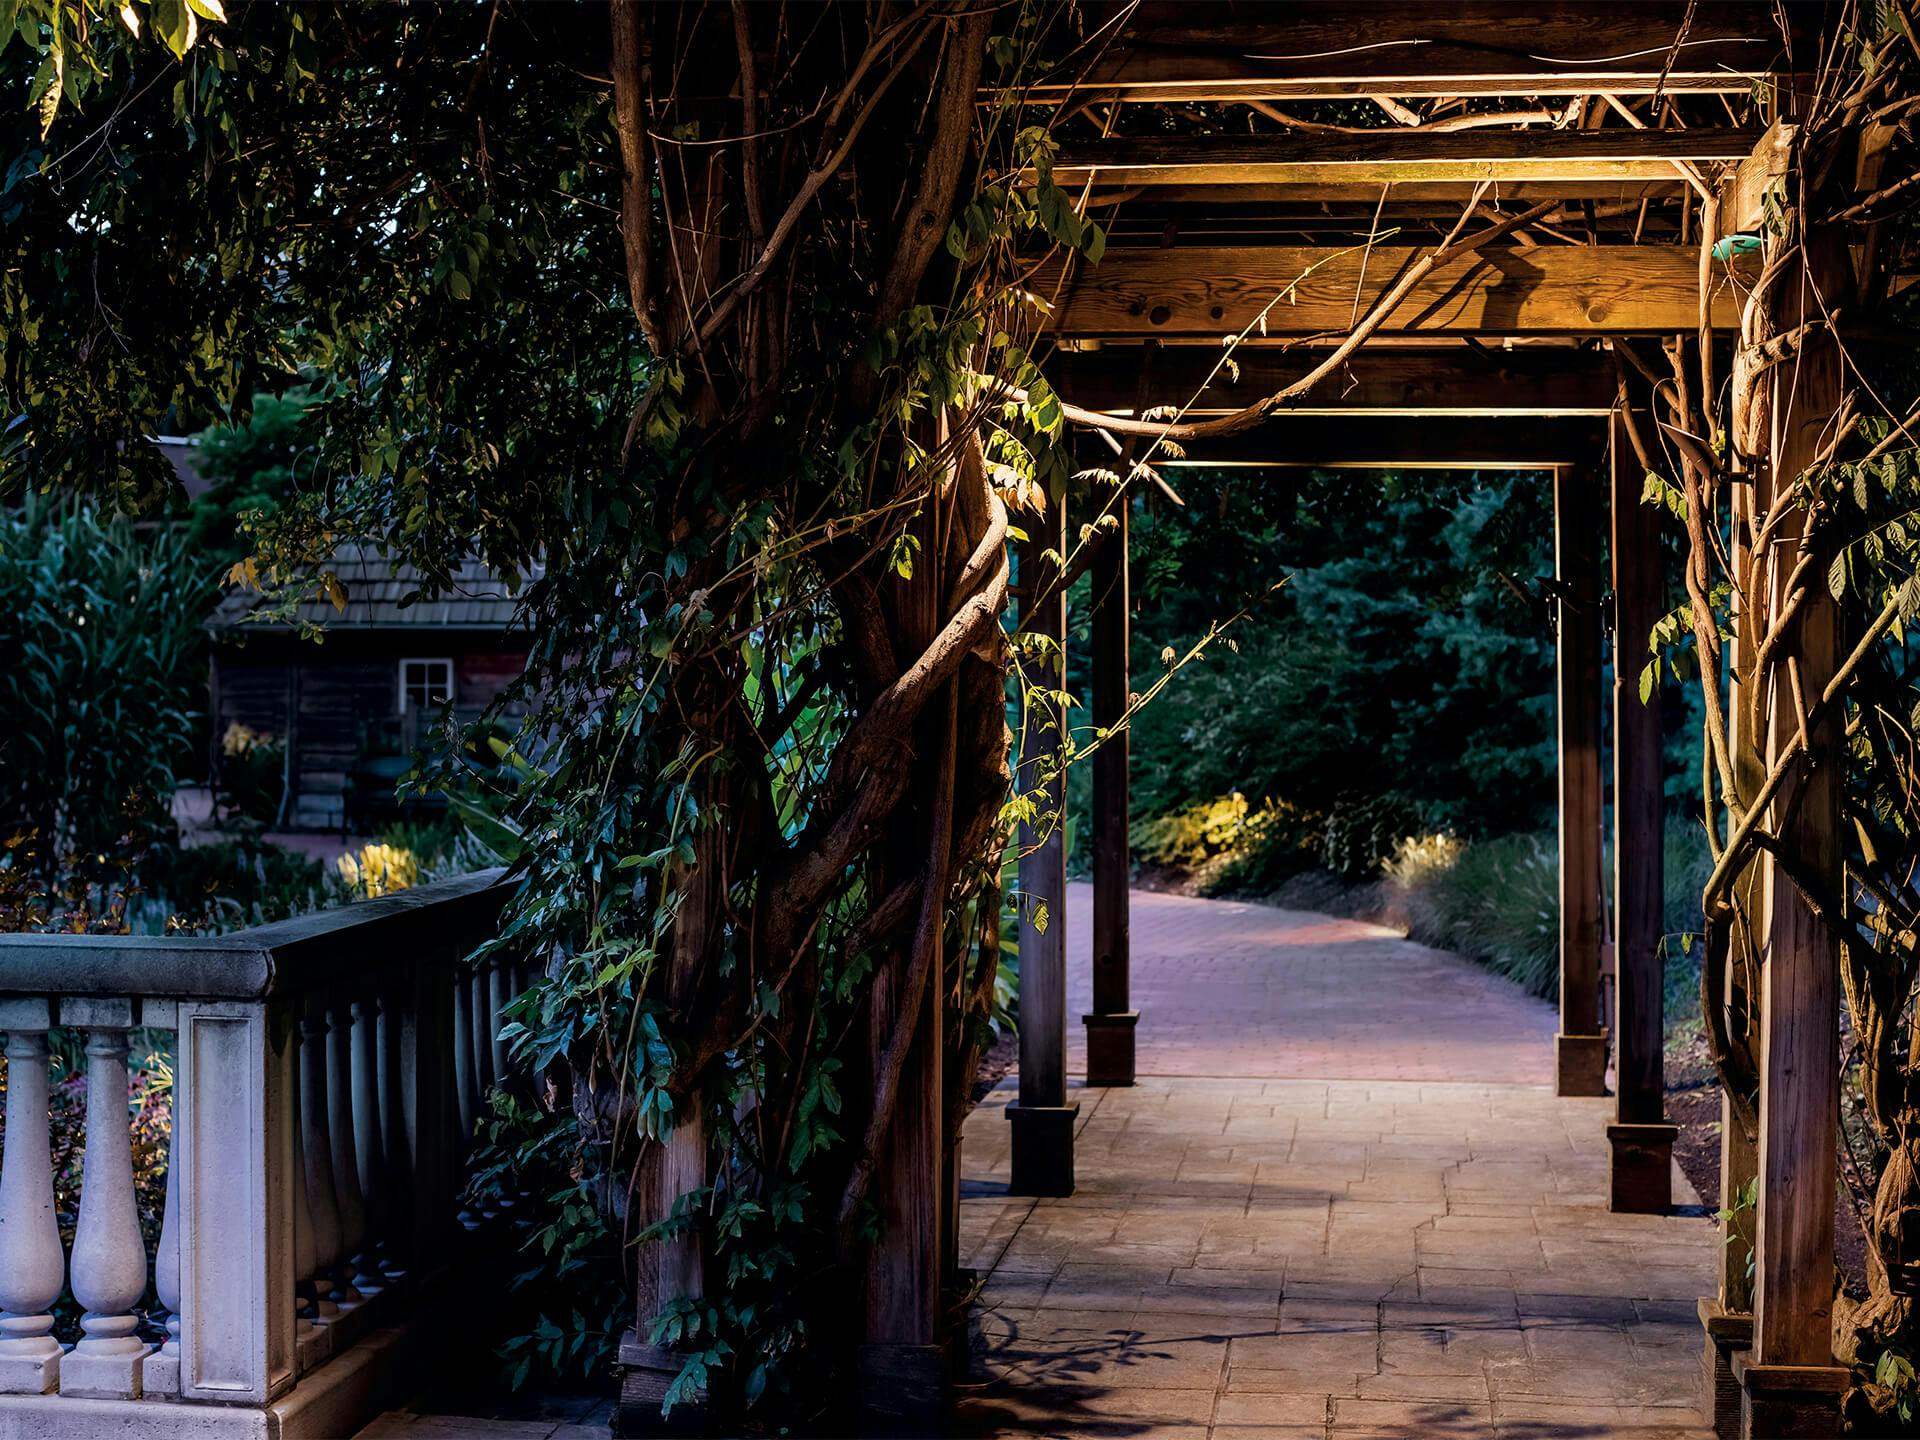 Akron Zoo's walking path at night with overhanging vines with uplighting